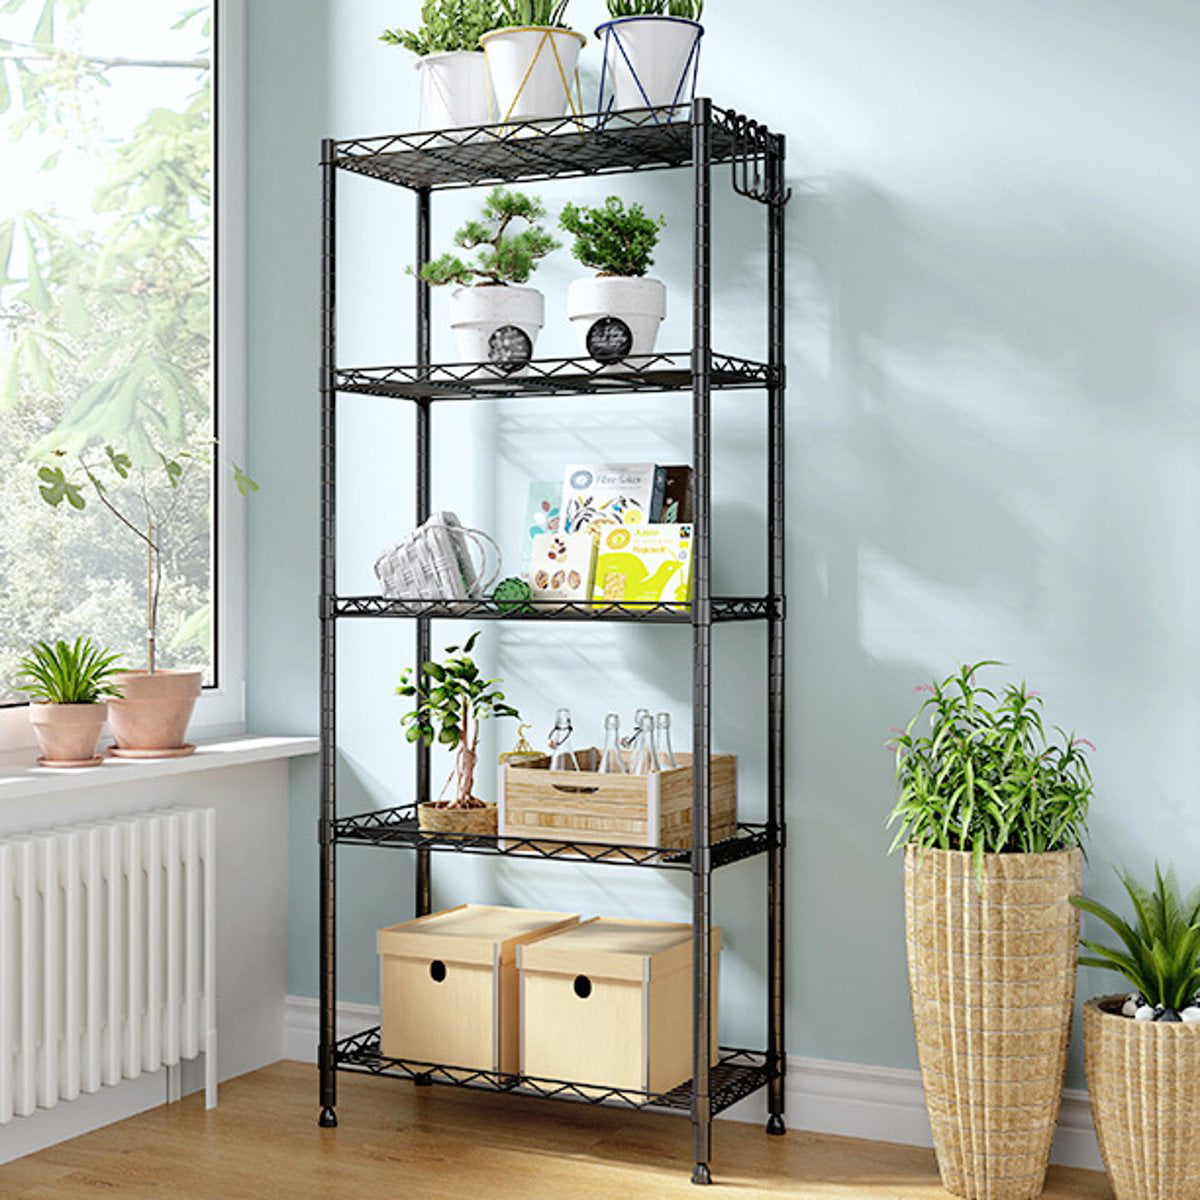 Creatice Kitchen Storage Shelves Canada for Small Space